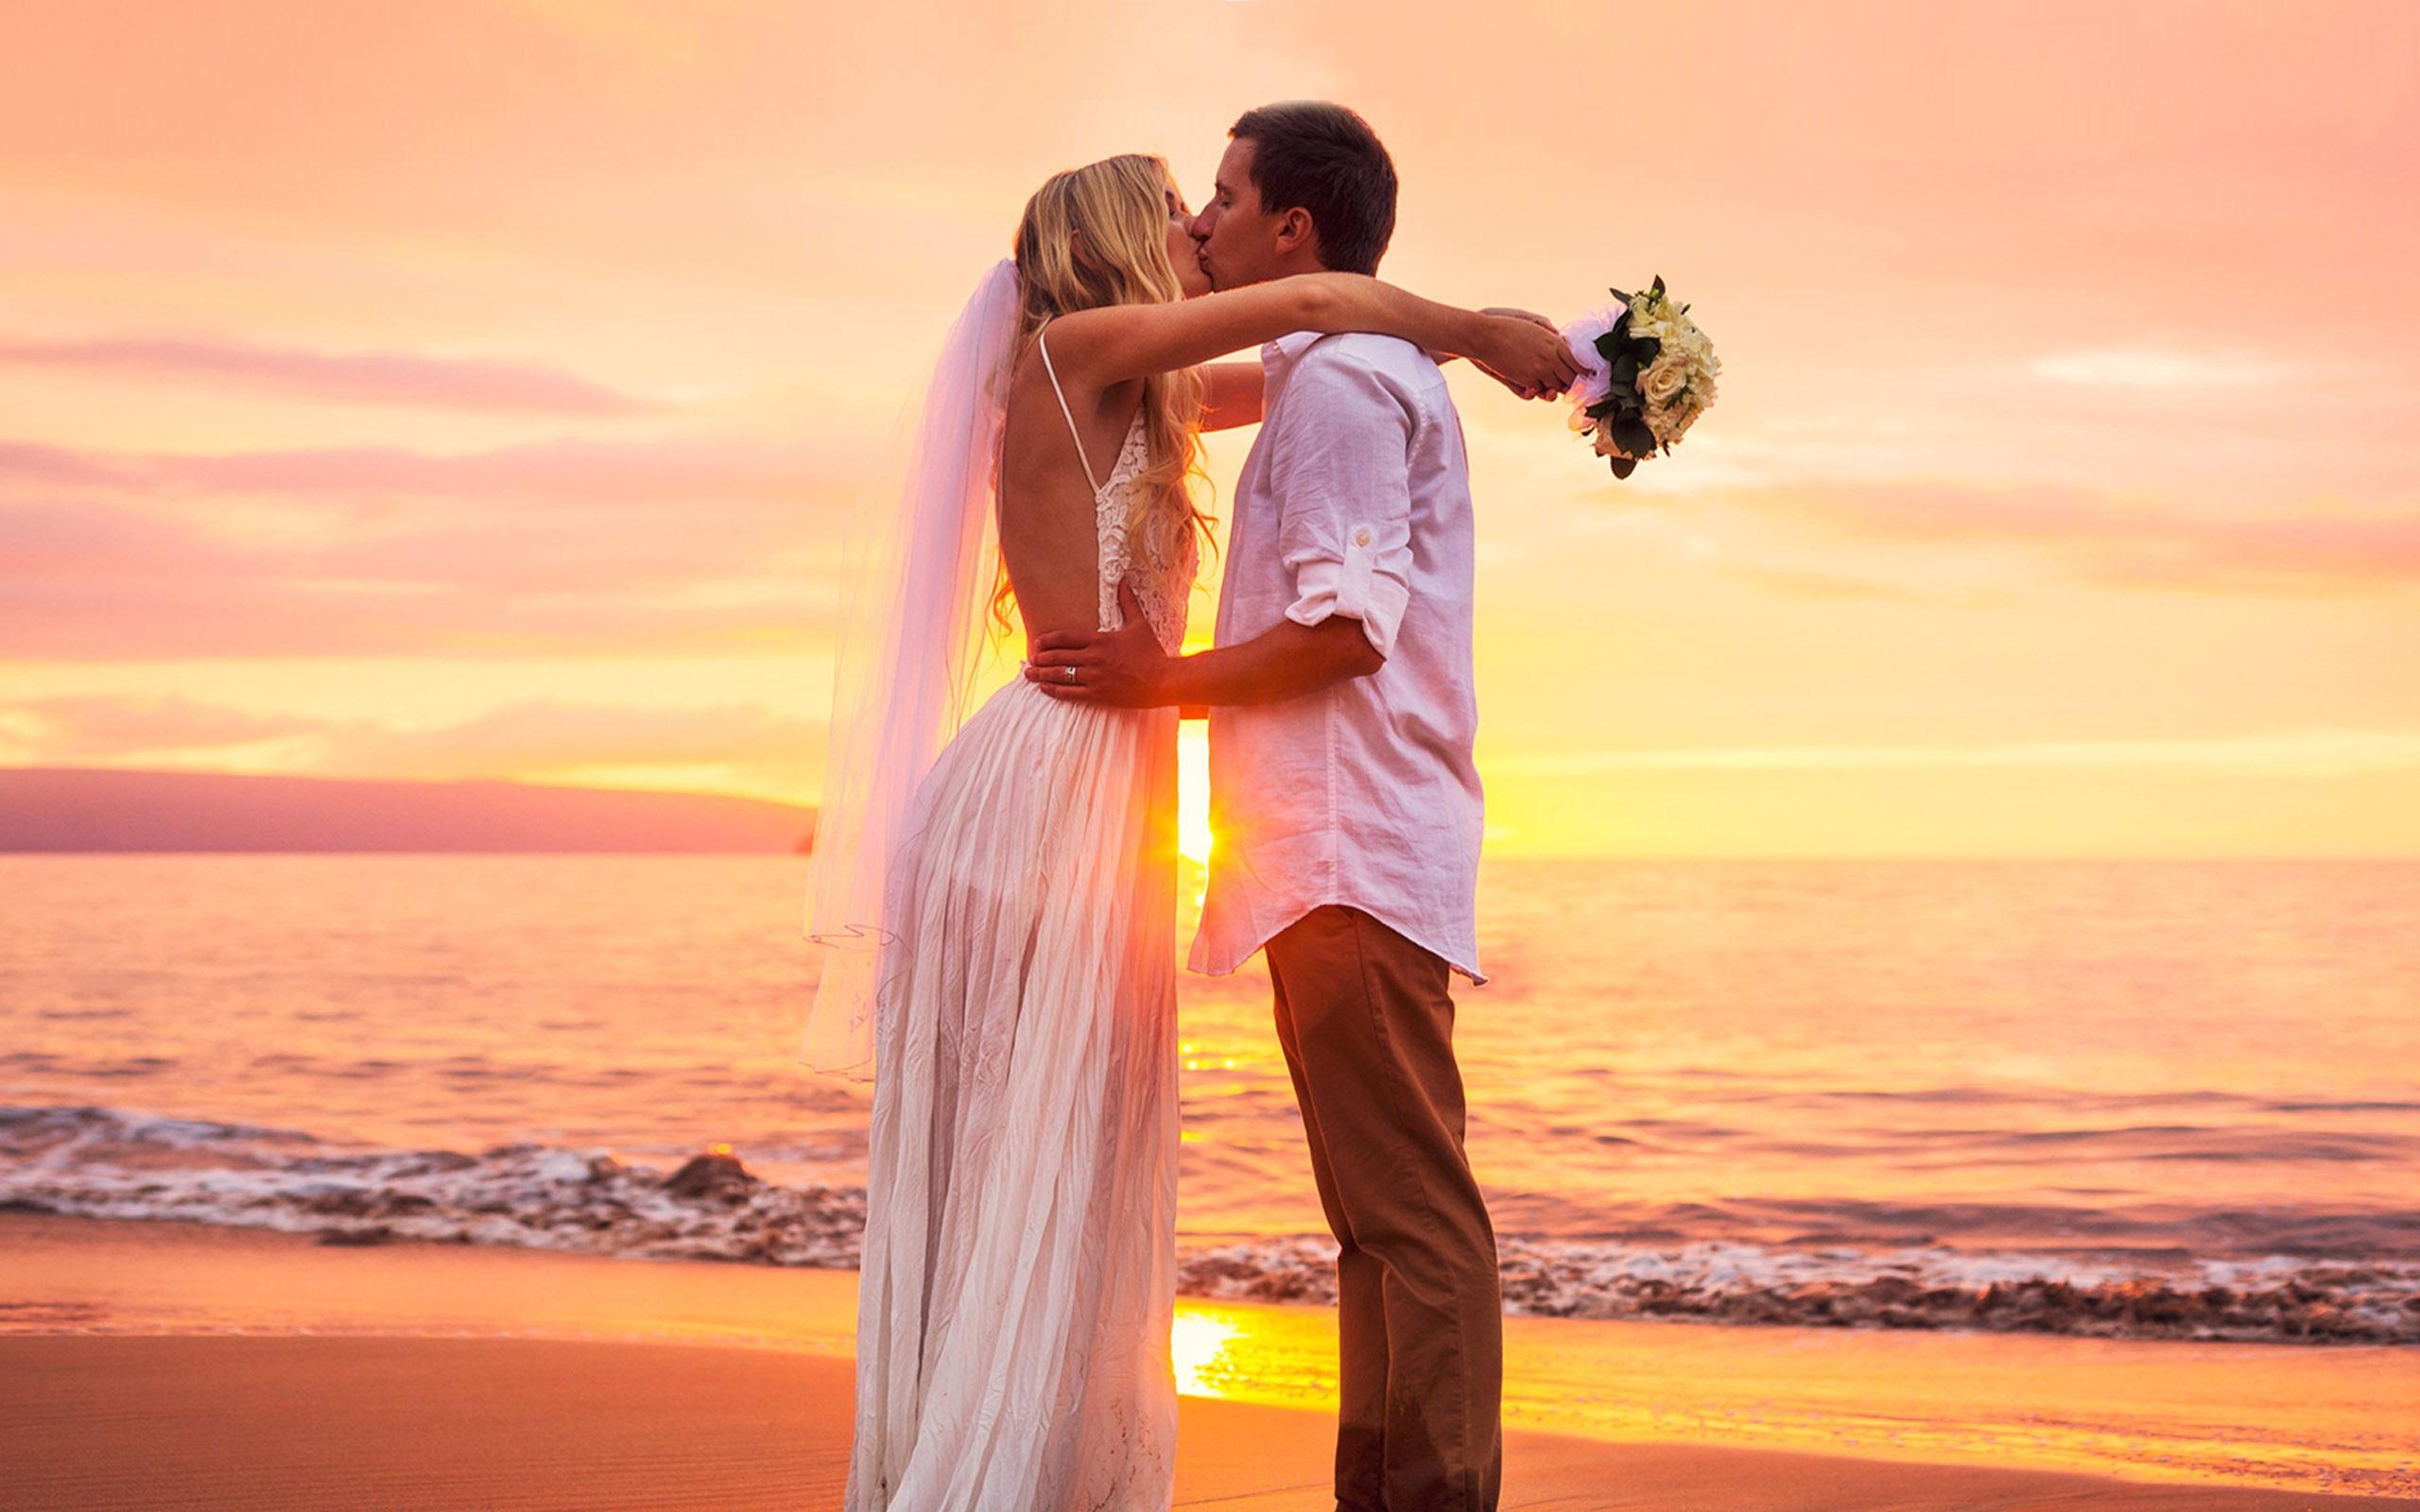 Kiss At Sunset Cute Couple Marriage Newly Married Image The Beach HD Wallpaper, Wallpaper13.com